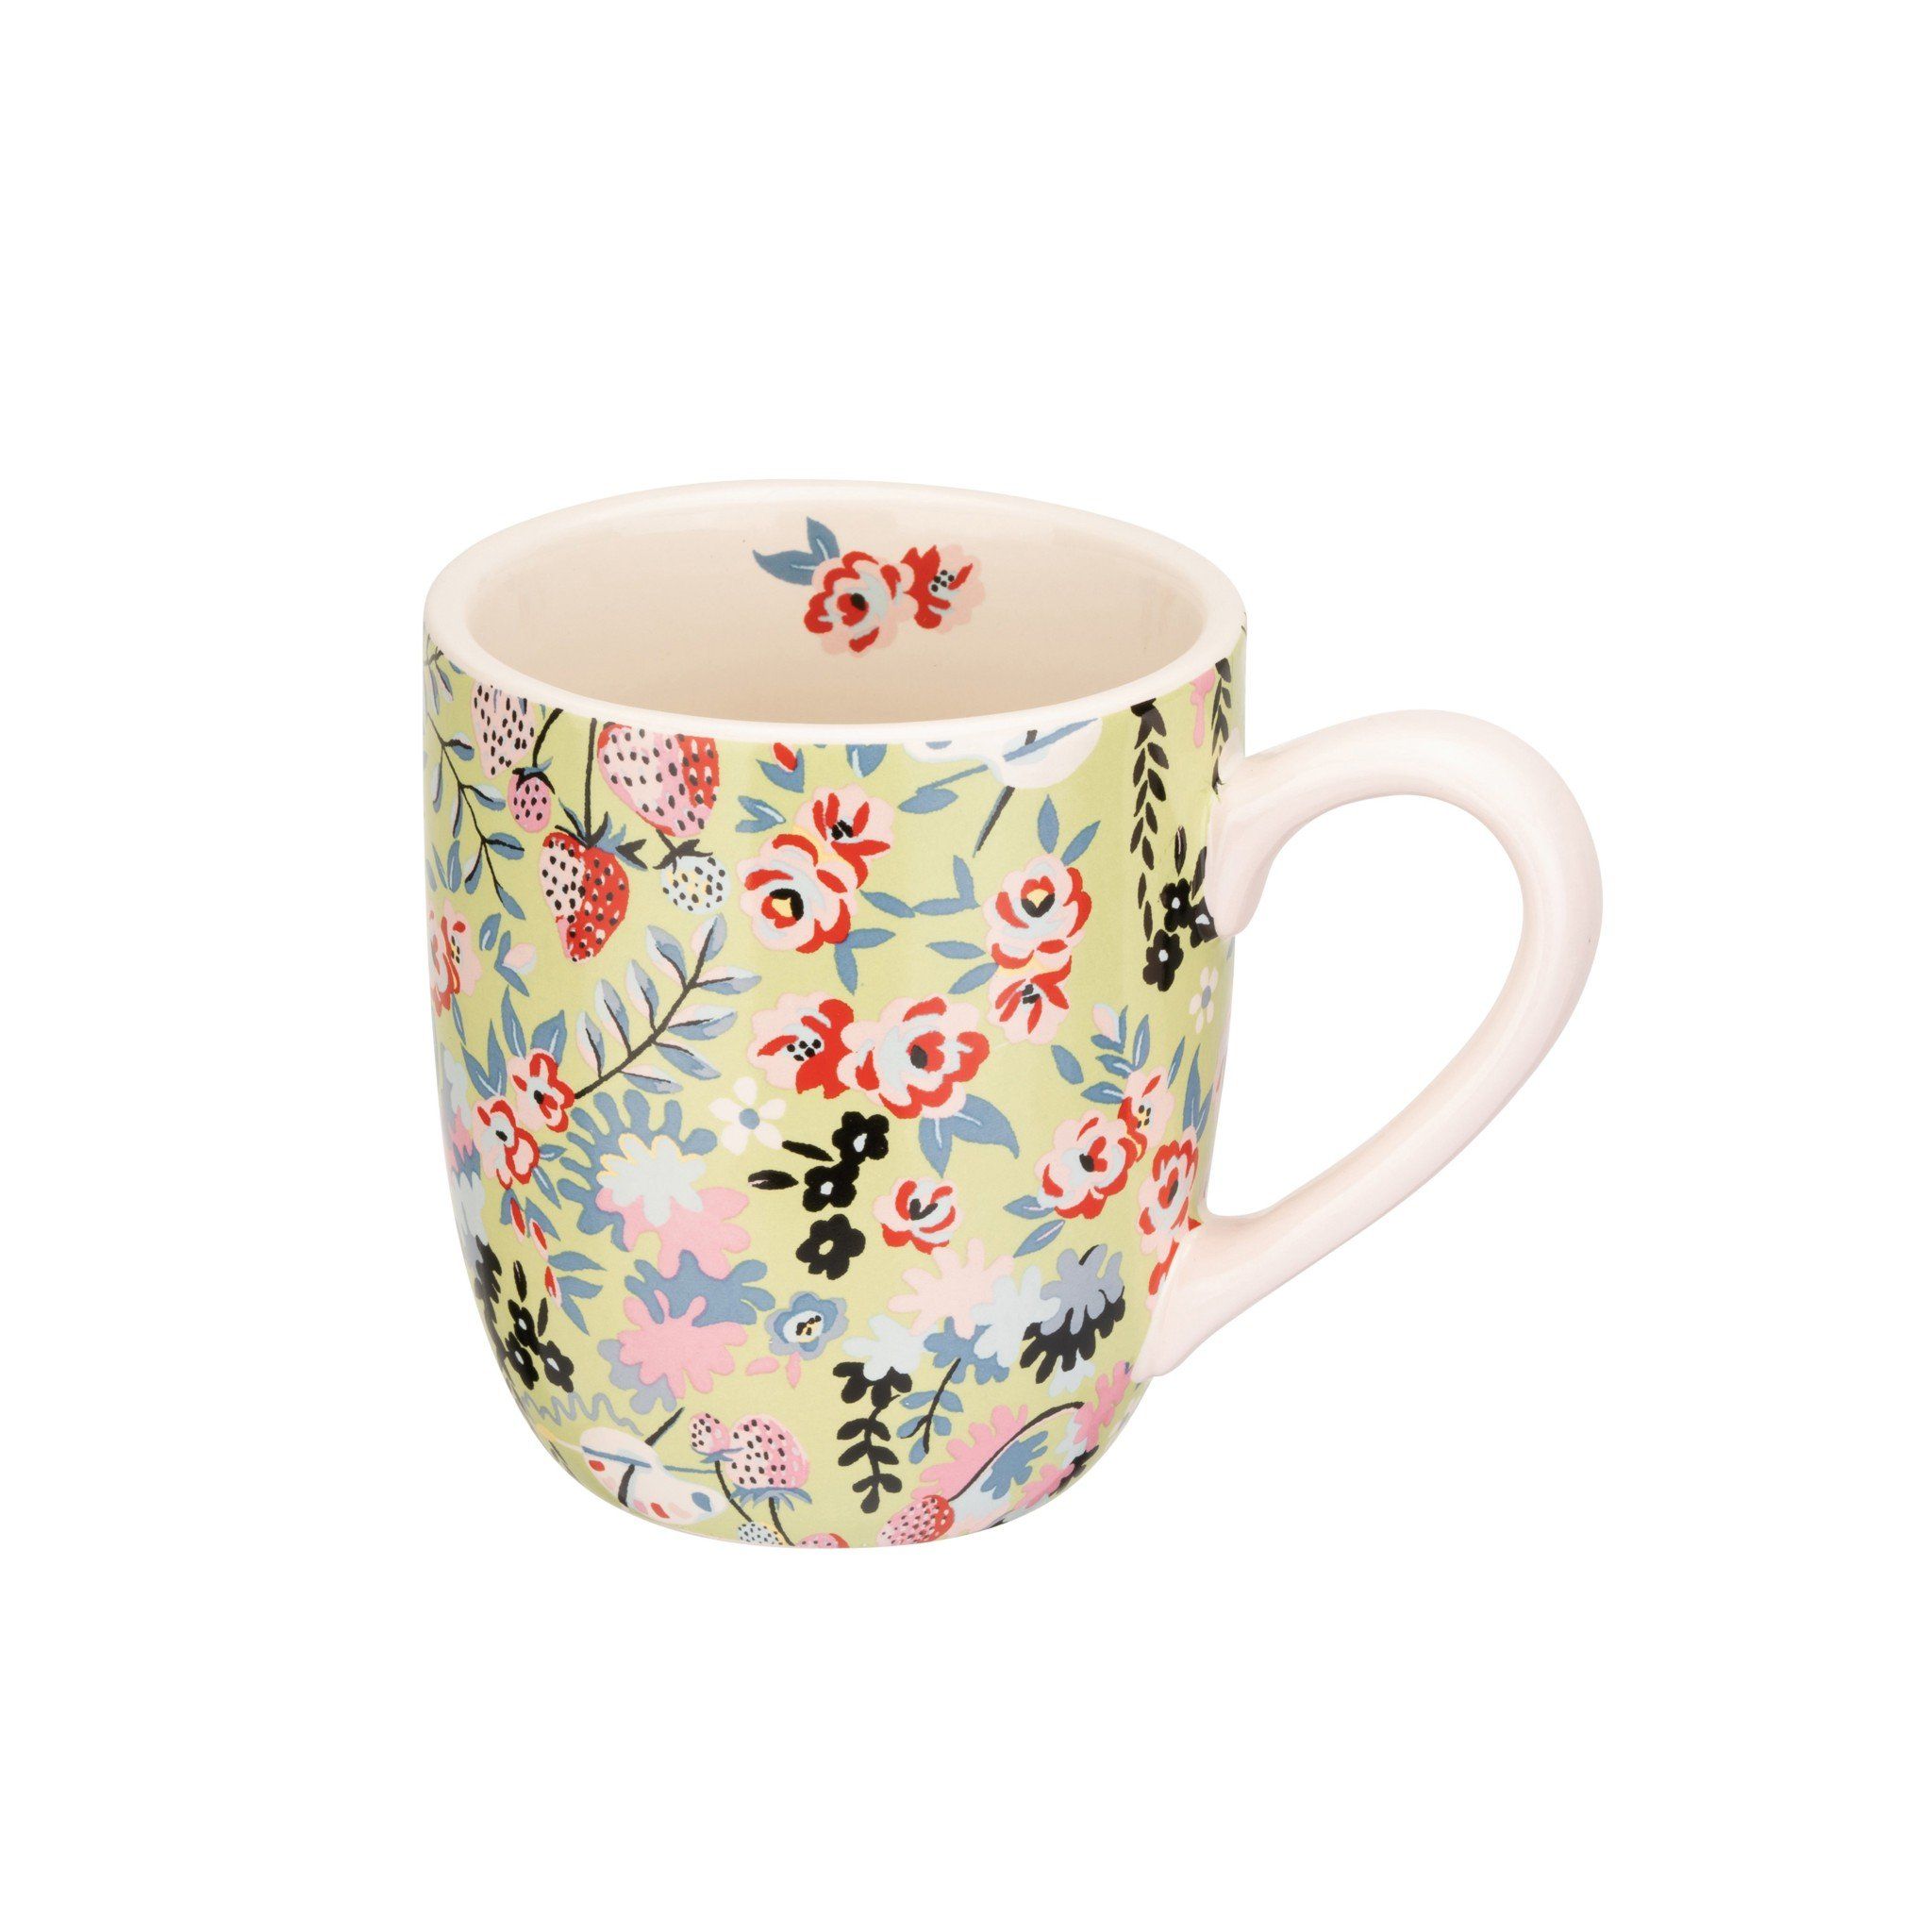  Ly/Mugs - Painted Table Ditsy Floral Breakfast - Green 